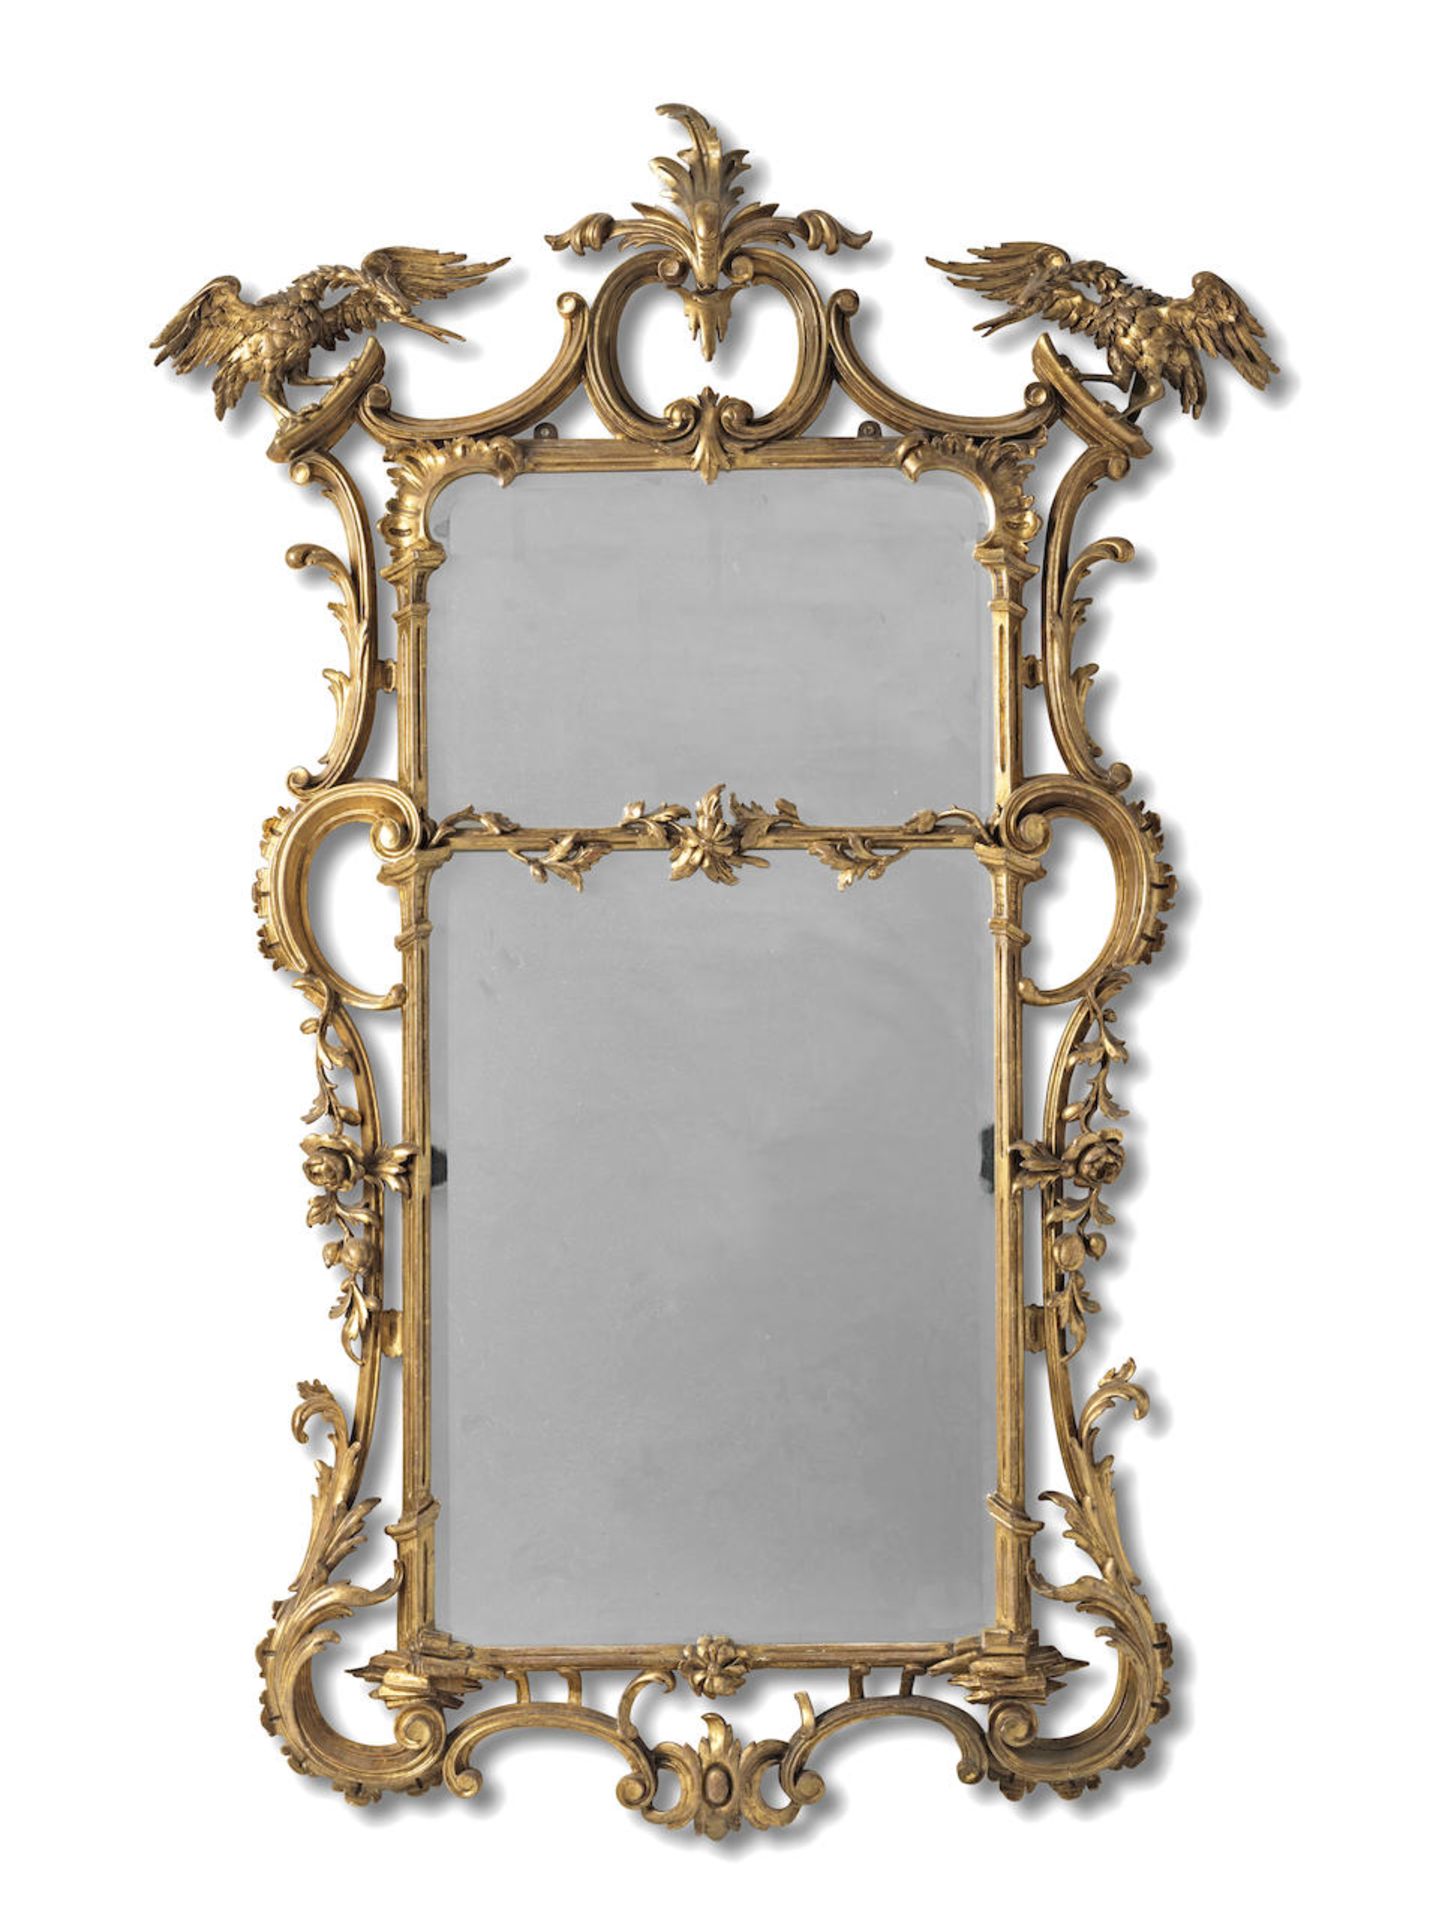 A mid Victorian giltwood mirror 1850-1875, in the George III Chippendale style